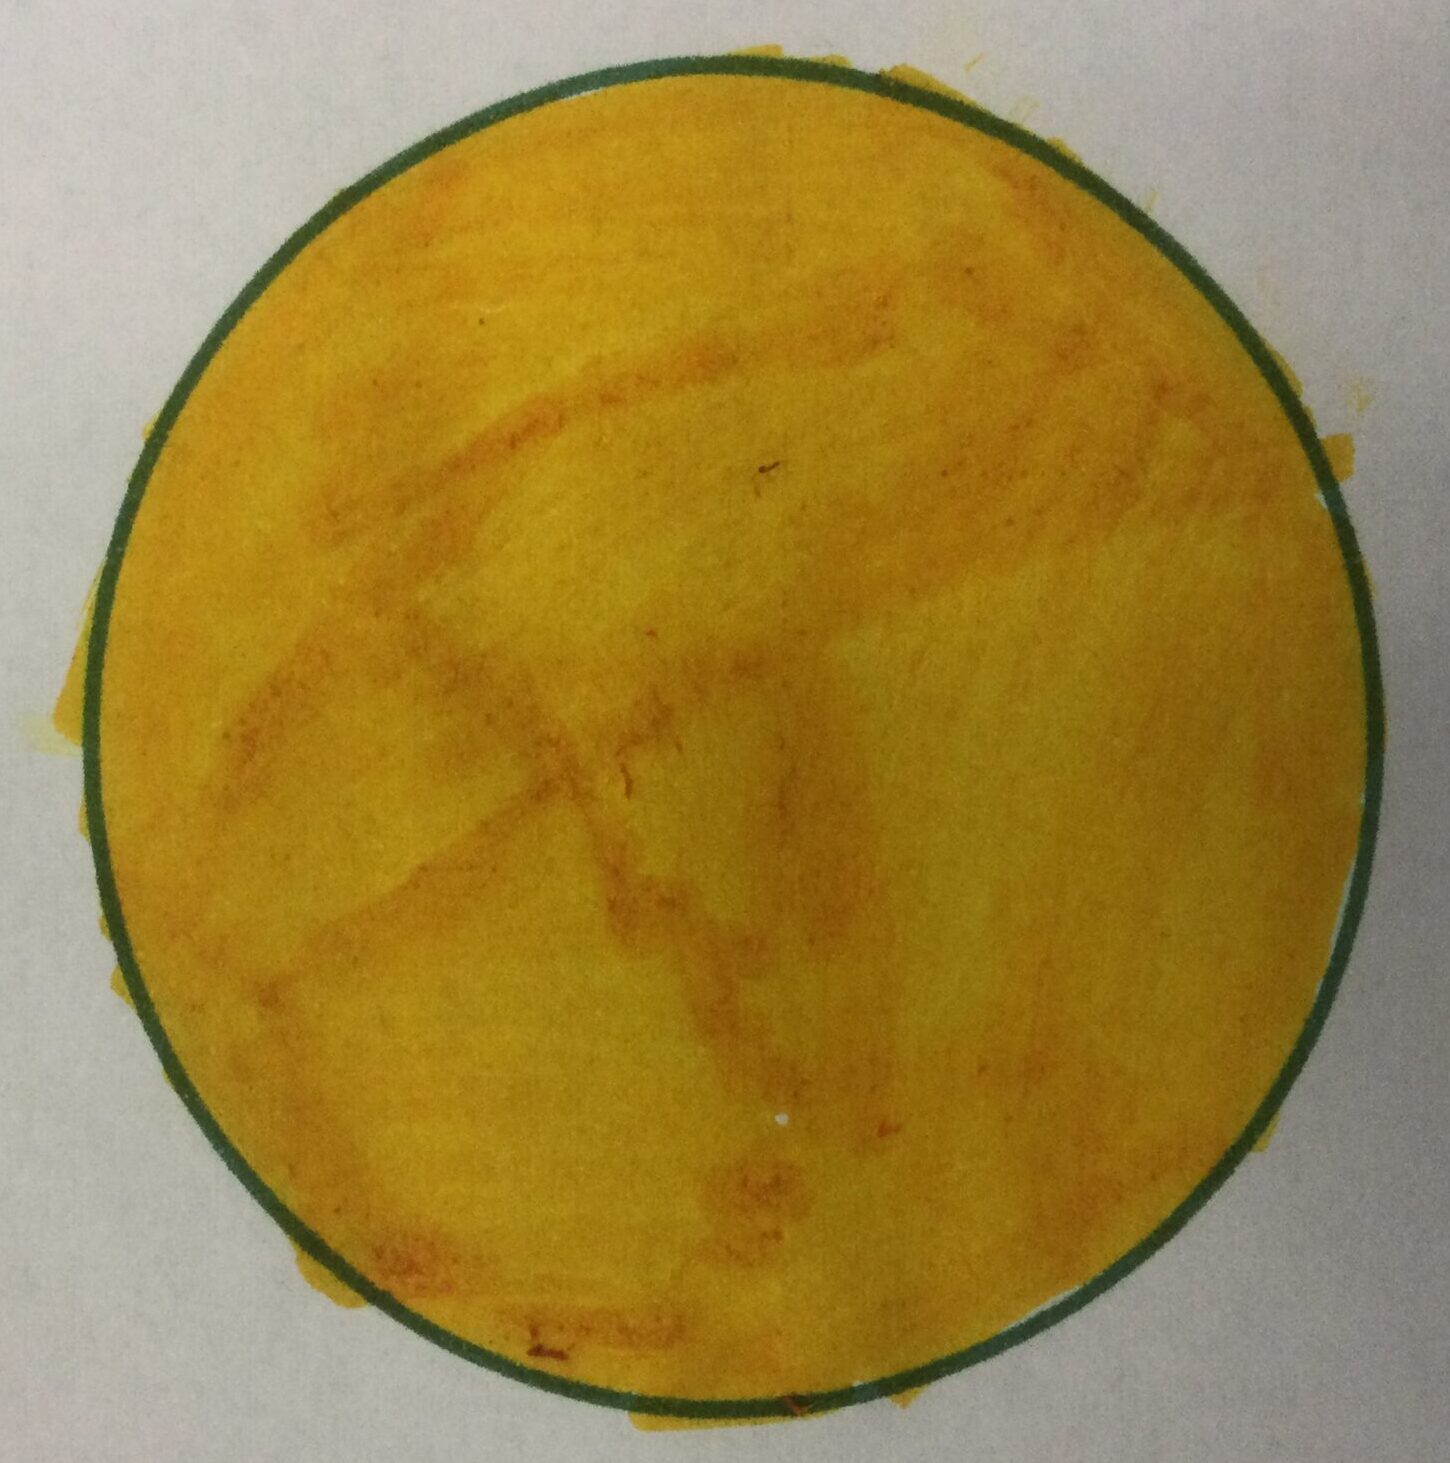 A gold coloured disc with a green outline